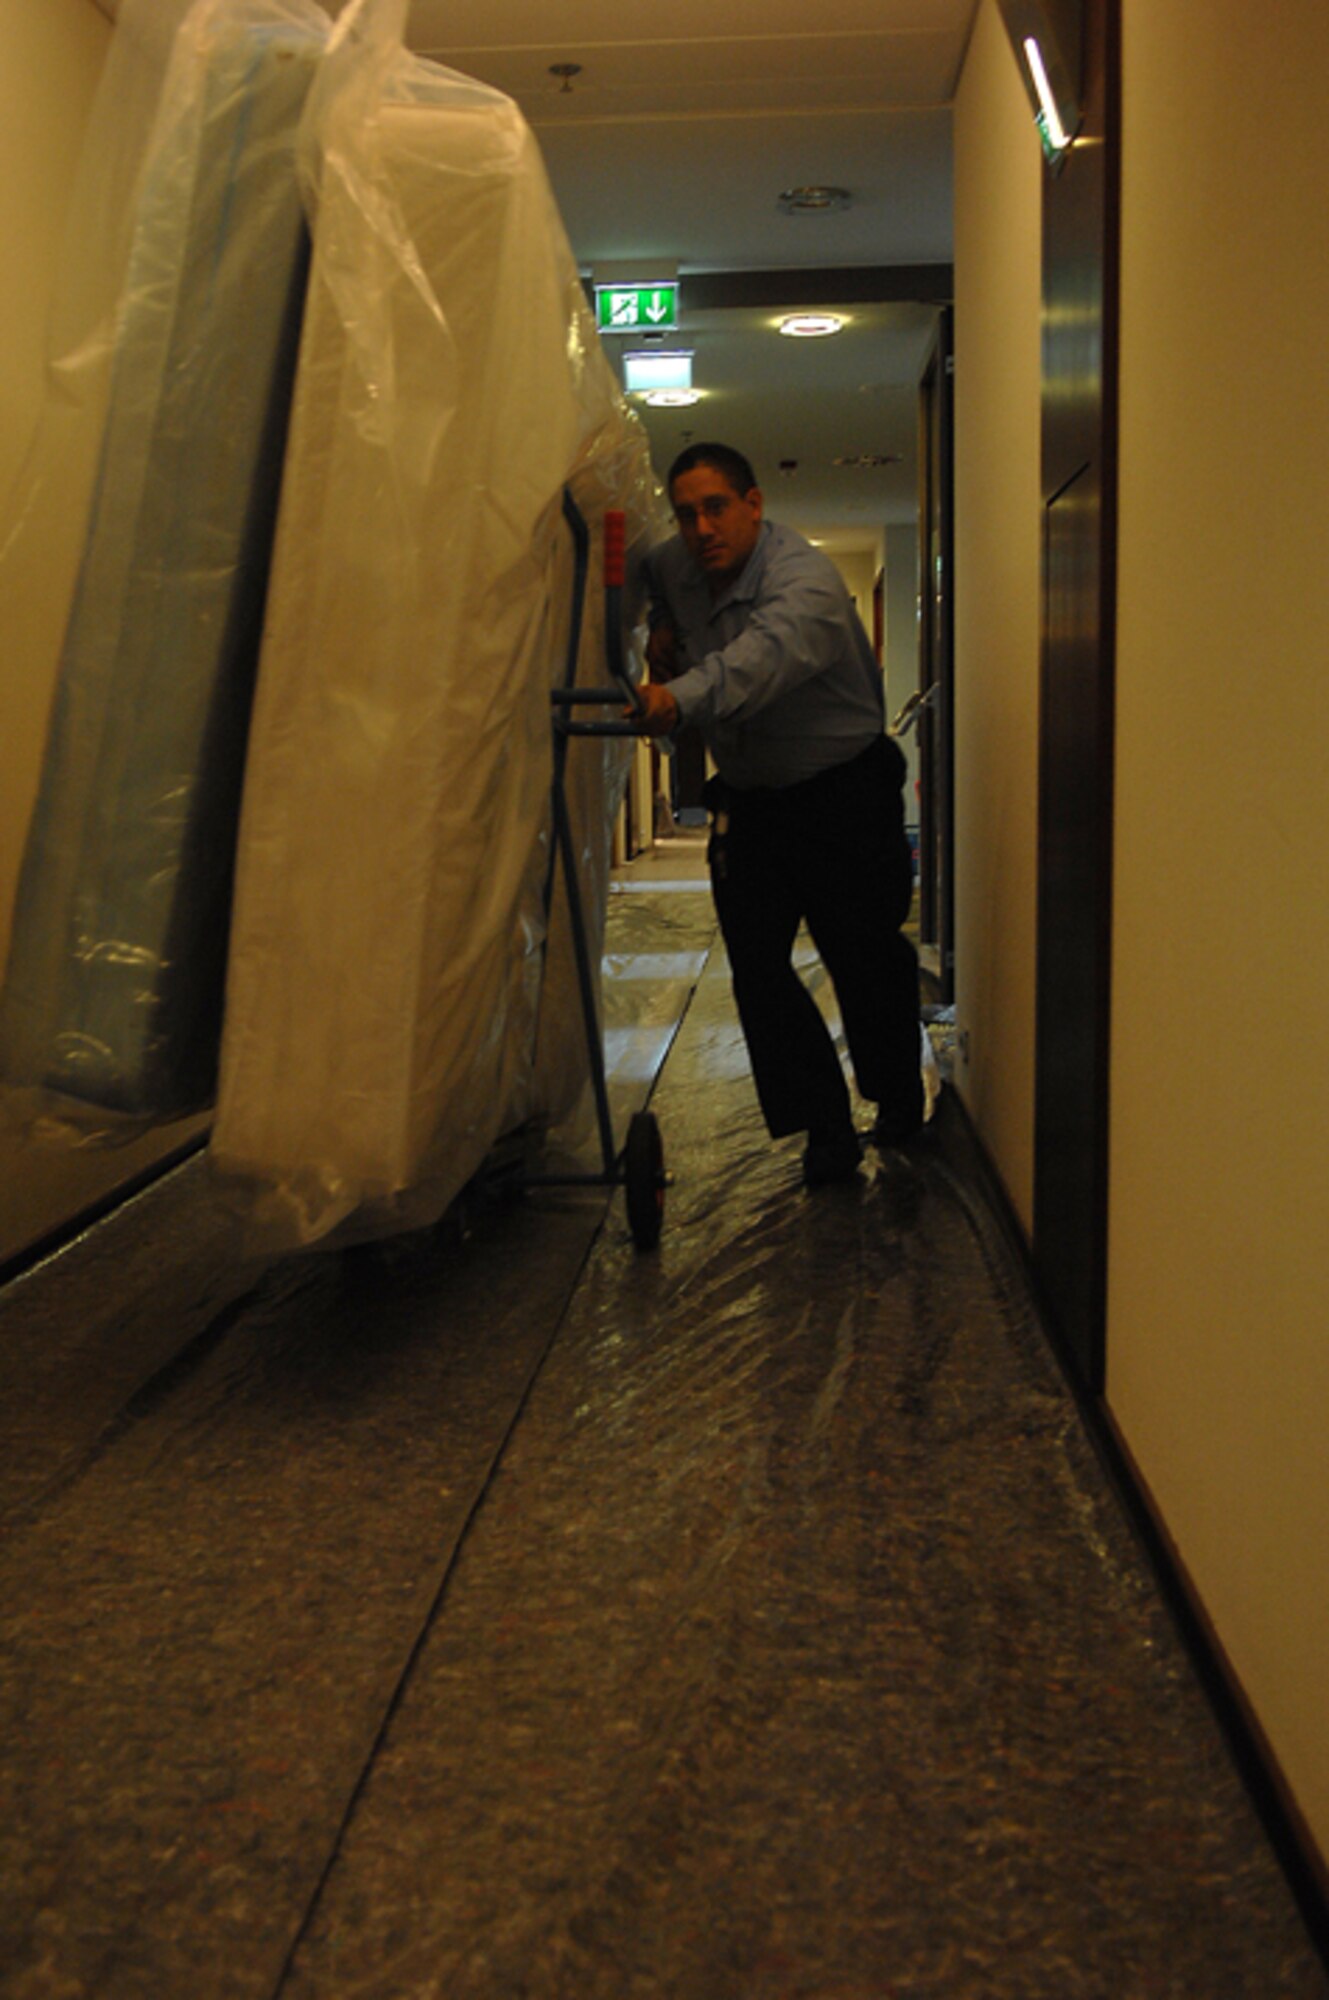 John Almodovar, Air Force Inns, moves mattresses for the new visitor quarters at the Kaiserslautern Military Community Center on Ramstein Air Base. The eight-story, 350-room visiting quarters facility will be one of the first areas to open as part of a $170 million project that will offer approximately 844,000 square feet of lodging, shopping and entertainment under one roof. (U.S. Air Force photo by Airman 1st Class Tony Ritter)
